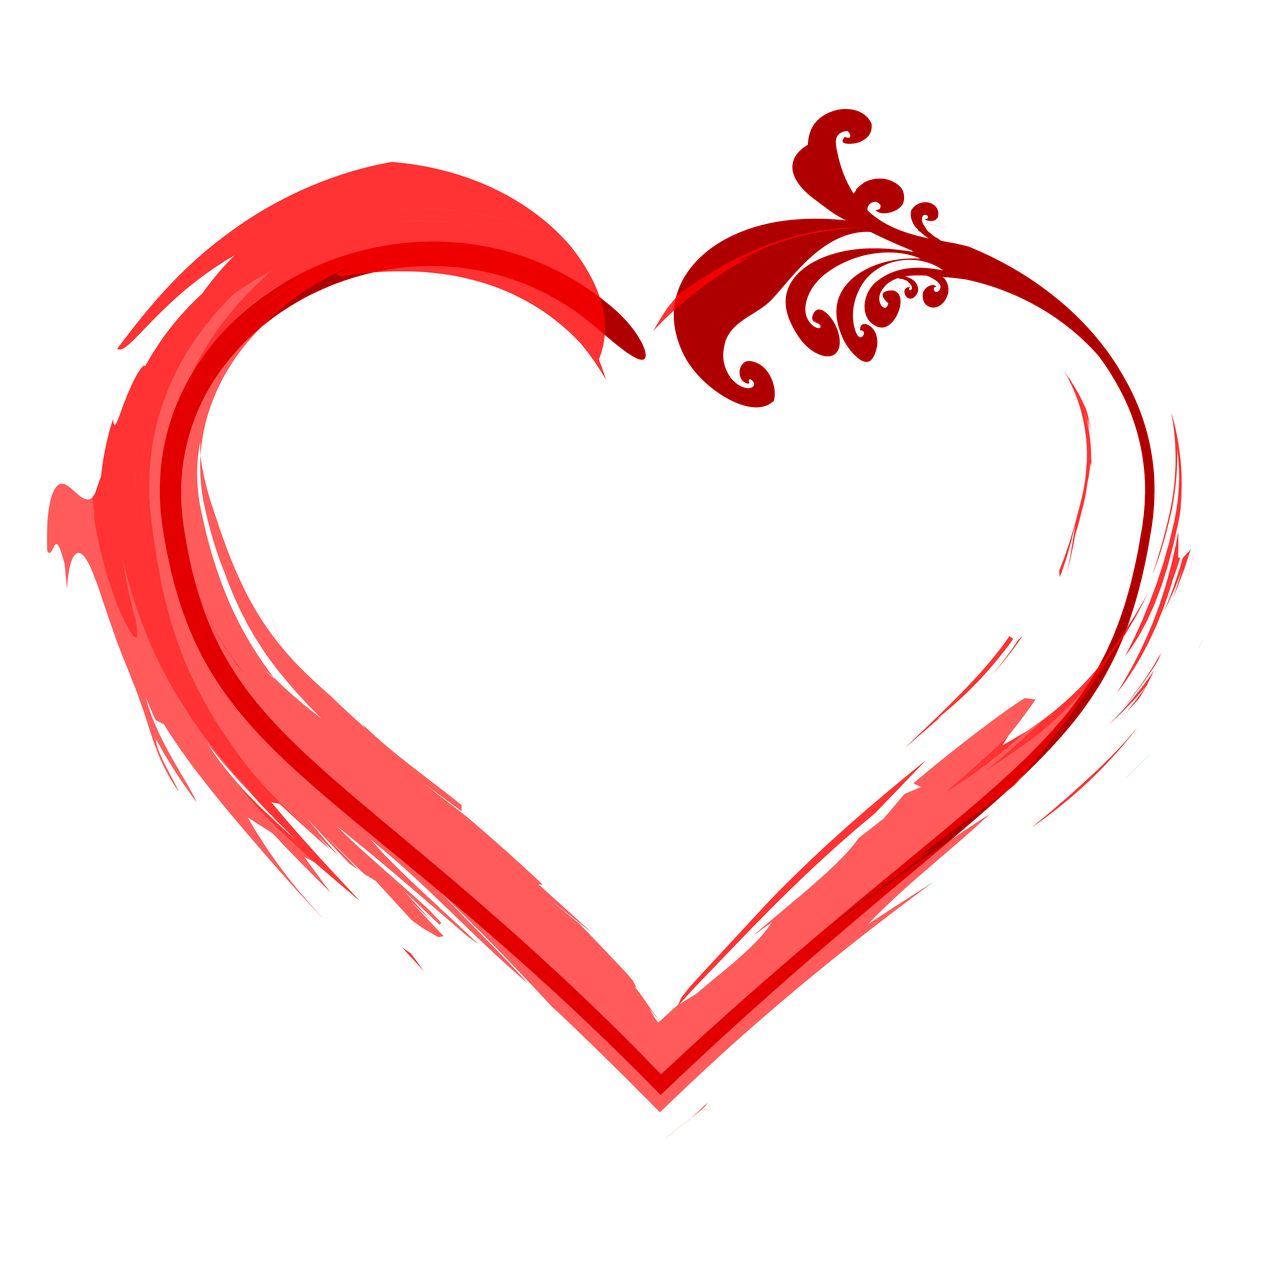 a red heart drawn with a brush on a black background, a picture, romanticism, red swirls, perfect design, proper shading, phone photo